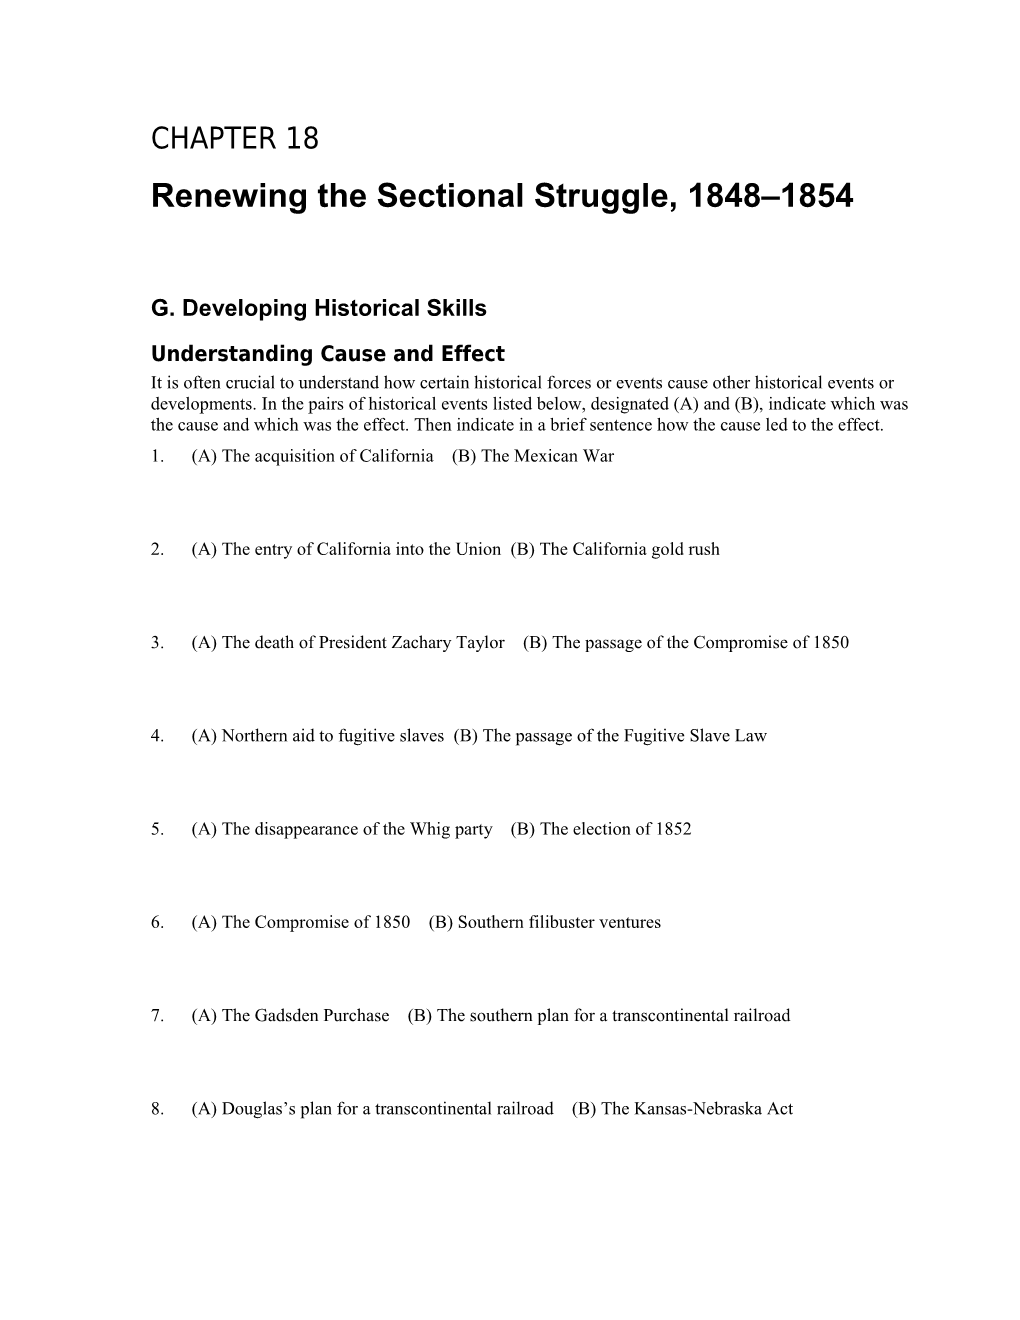 Renewing the Sectional Struggle, 1848 1854